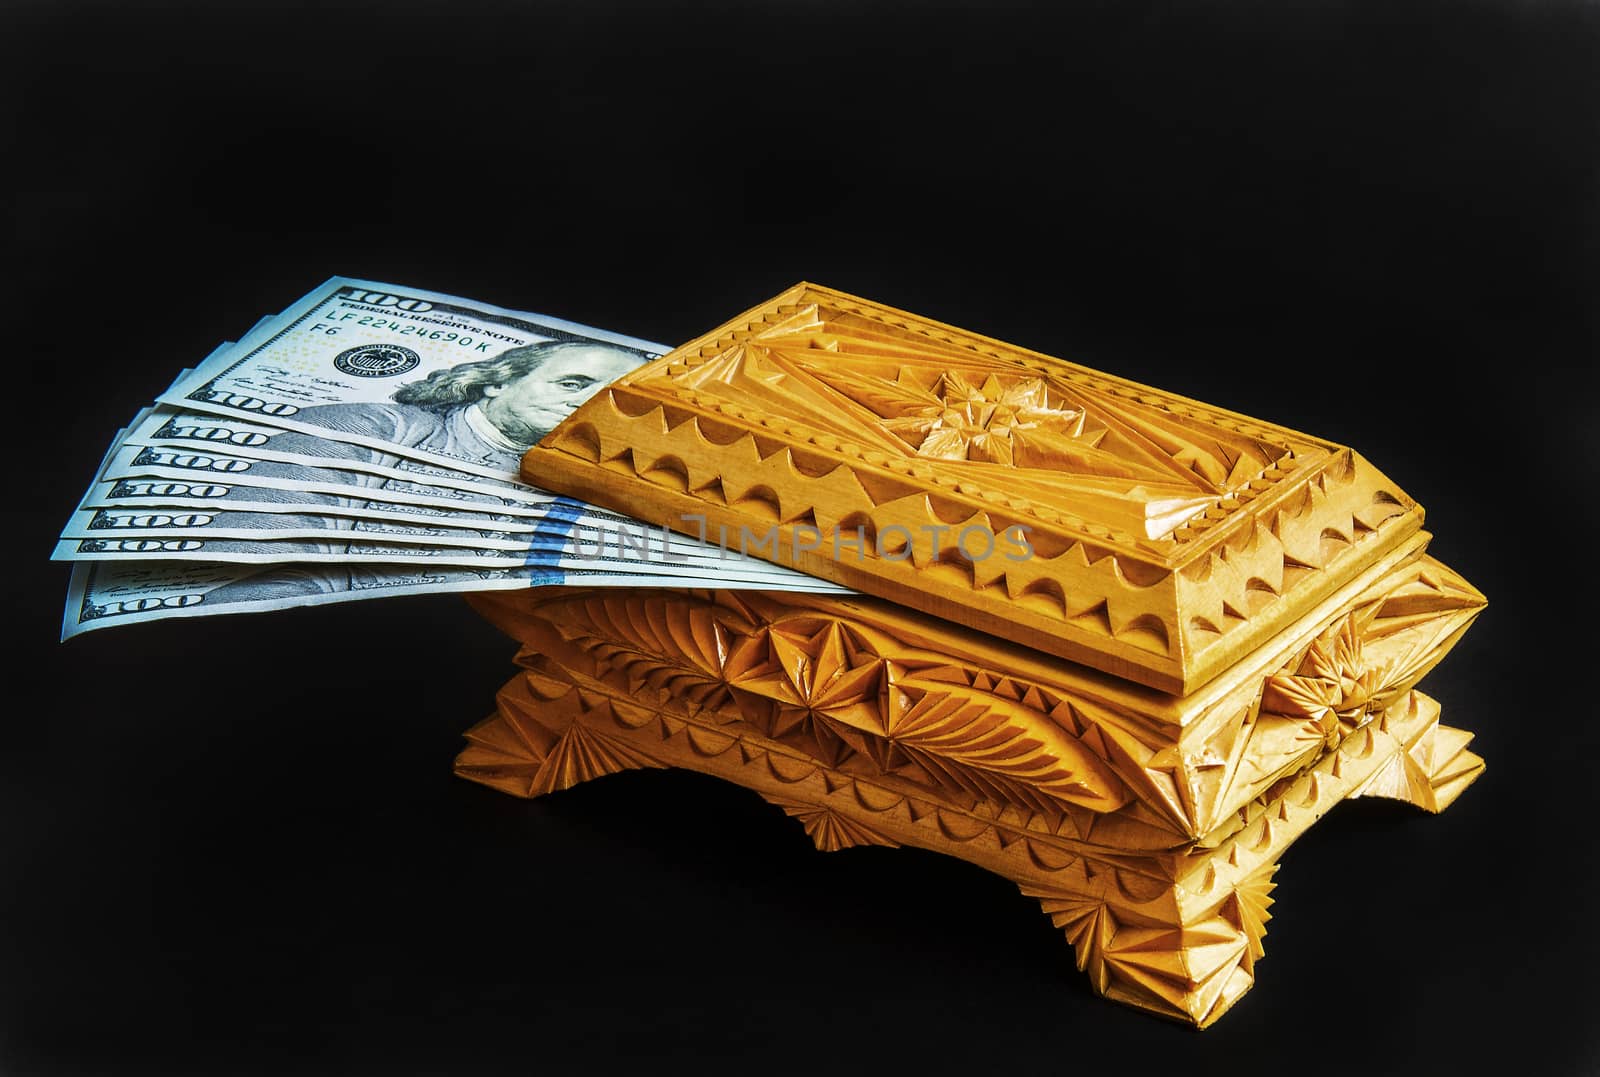 Wooden box with US 100 dollar bills by Grommik